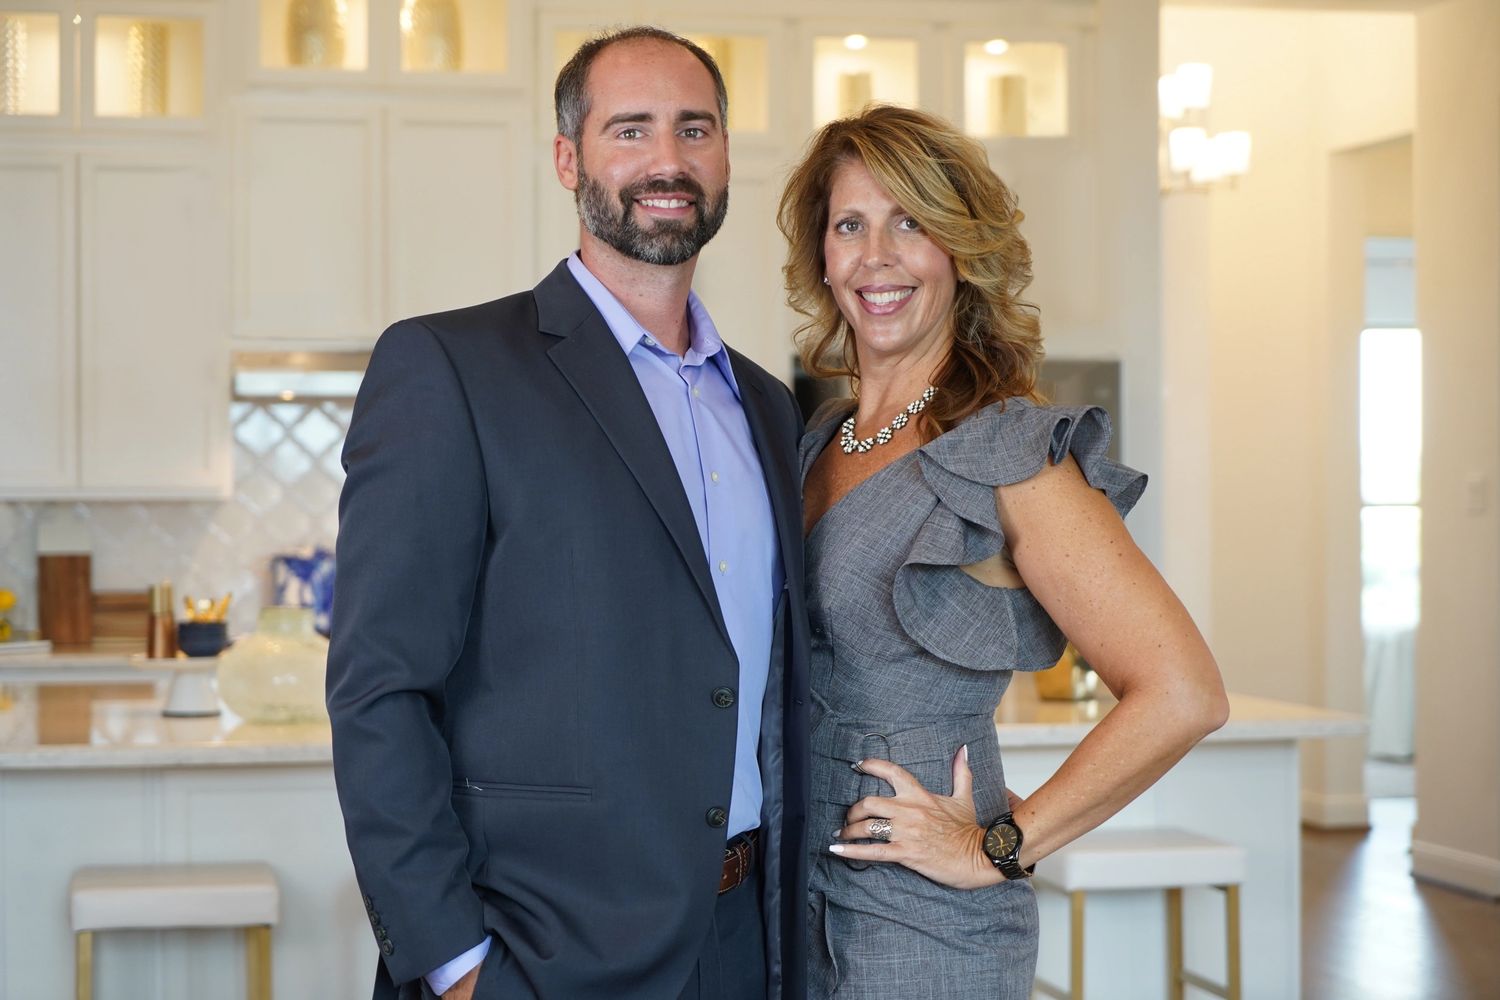 Scotty Gifford & Amber Gifford 
Divorce Real Estate Specialists